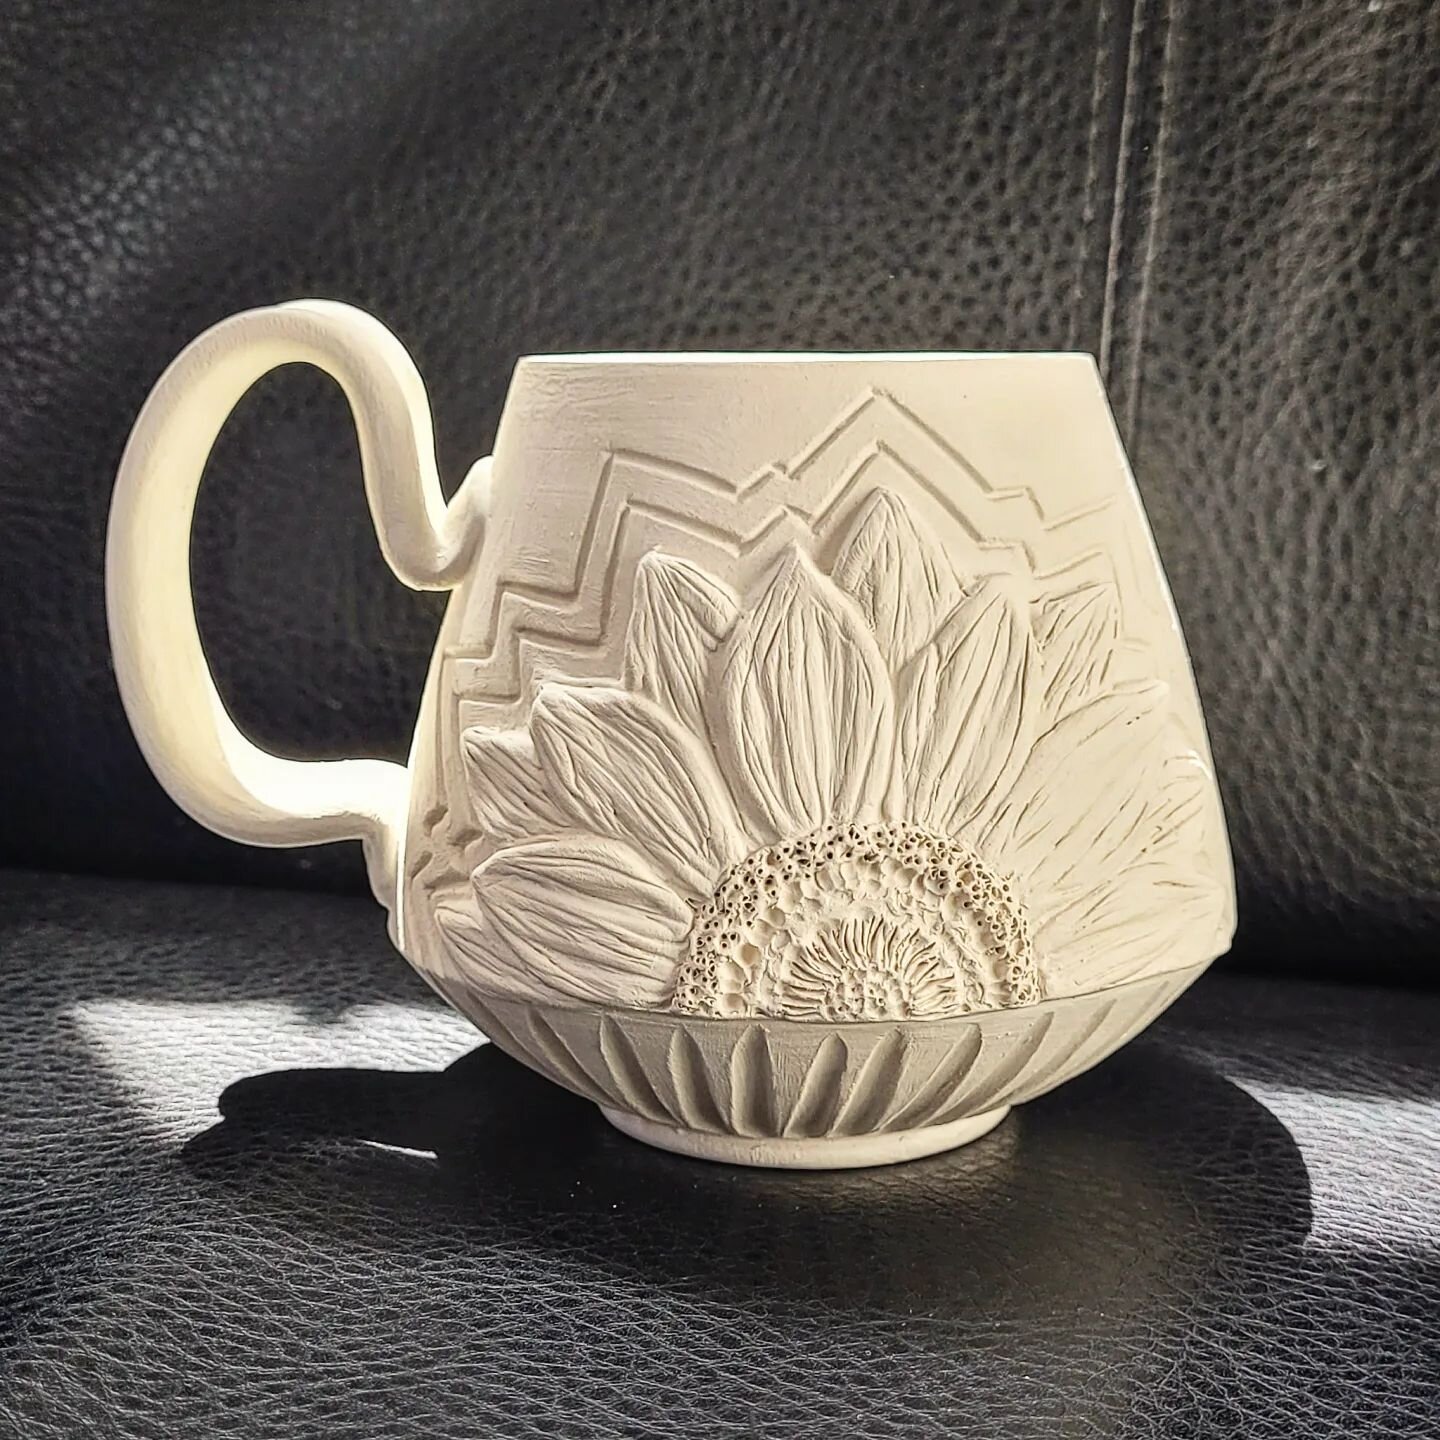 3D florals are back!!! My plan is to combine them with my carved retro bloom designs. So excited to start this batch of work! 
🌻
What flower(s) would you like to see?
.
.
.
#local #sunflower #handbuilt #3D #retrobloom #mug #geometric #vintagemodern 